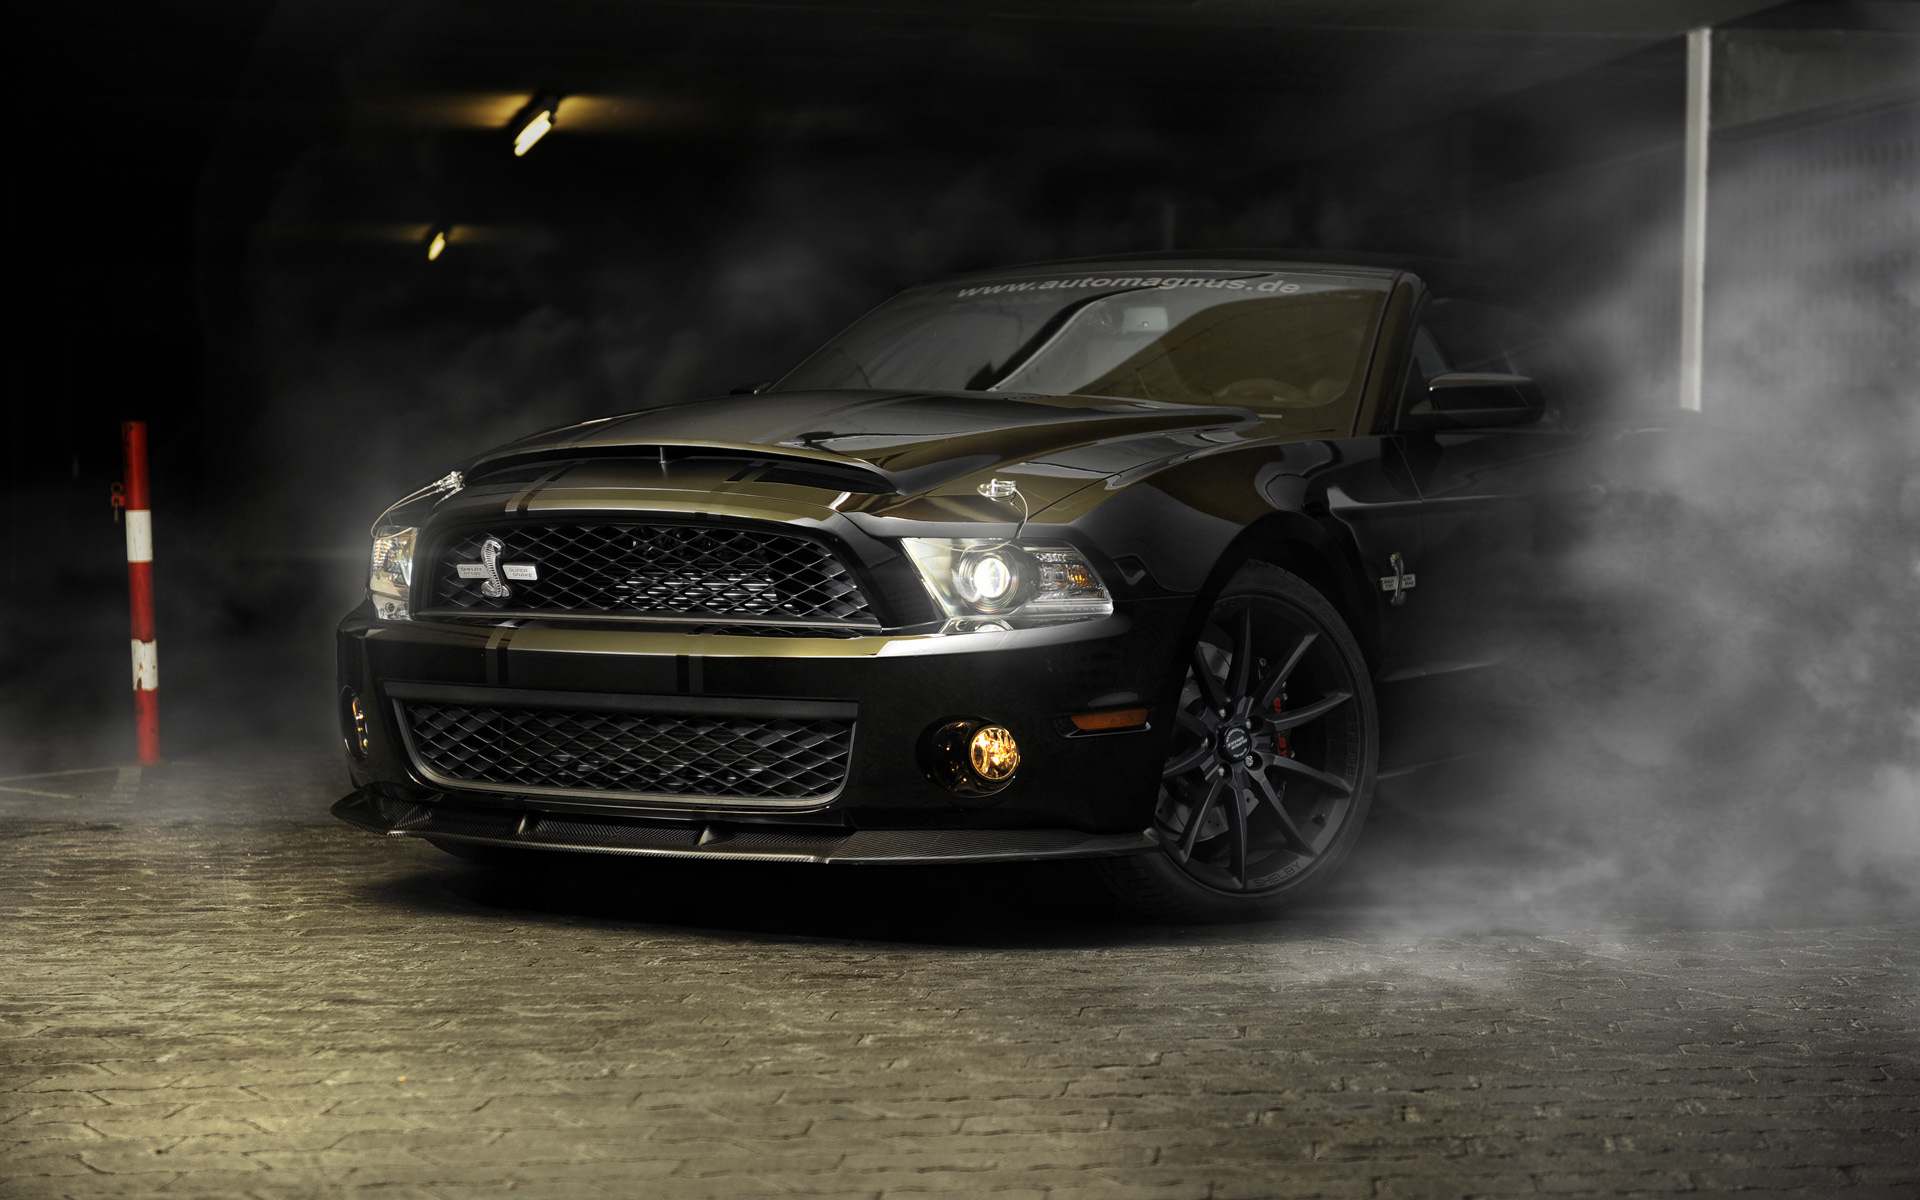 ford, Mustang, Gt500, Super, Snake, Vehicles, Cars, Auto, Smoke, Rubber, Burnout, Wheels, Lights, Roads, Ford Wallpaper